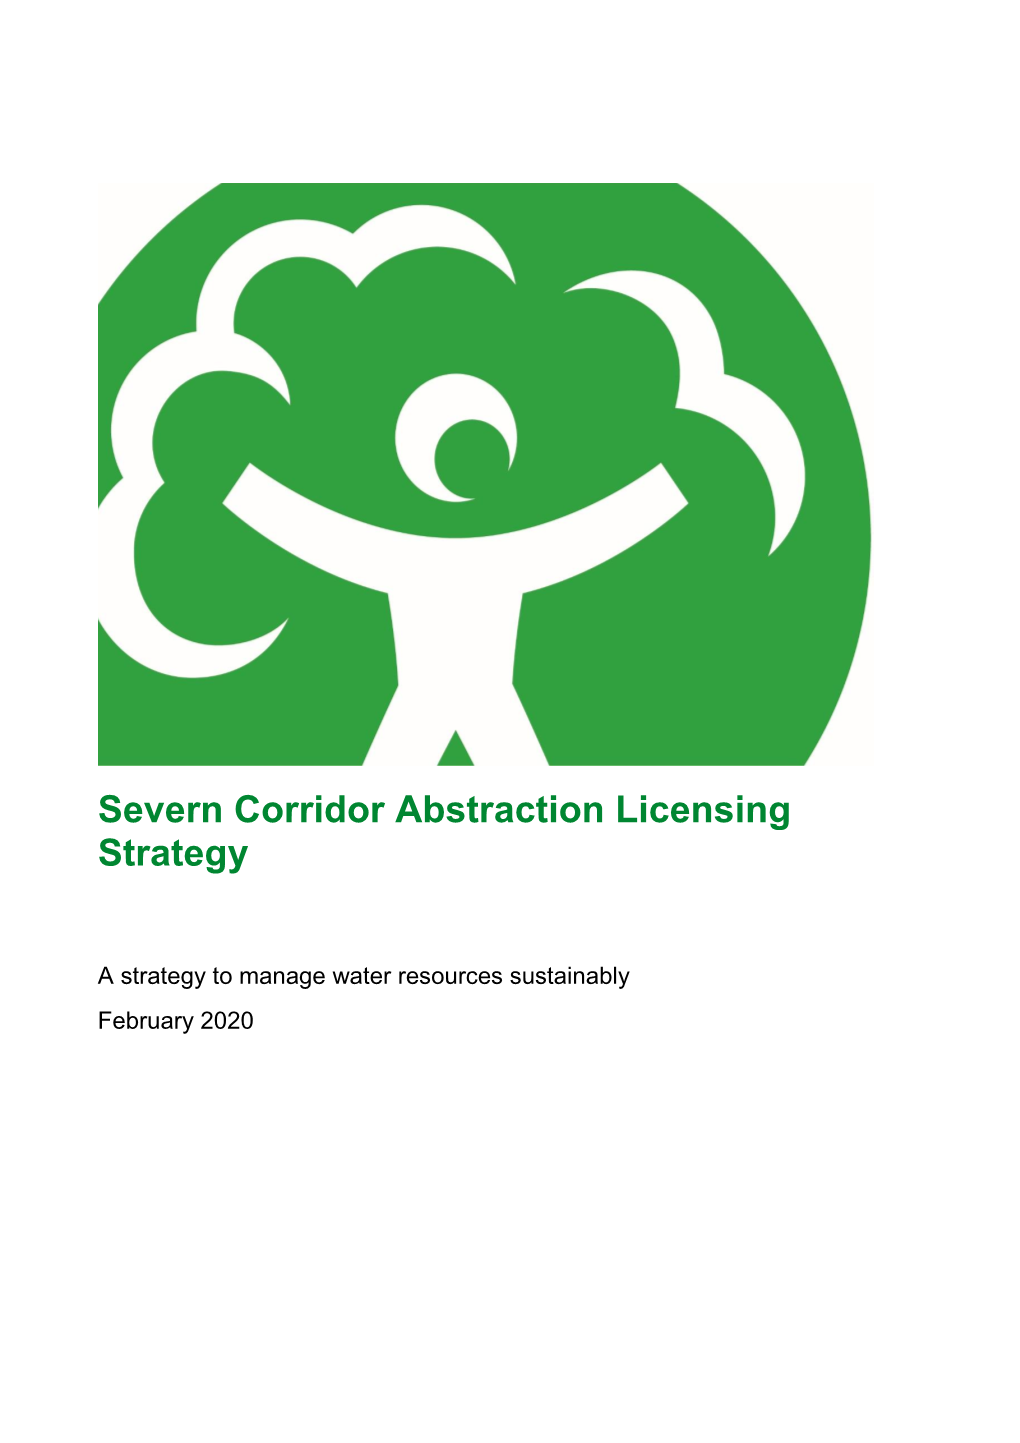 Severn Corridor Abstraction Licensing Strategy